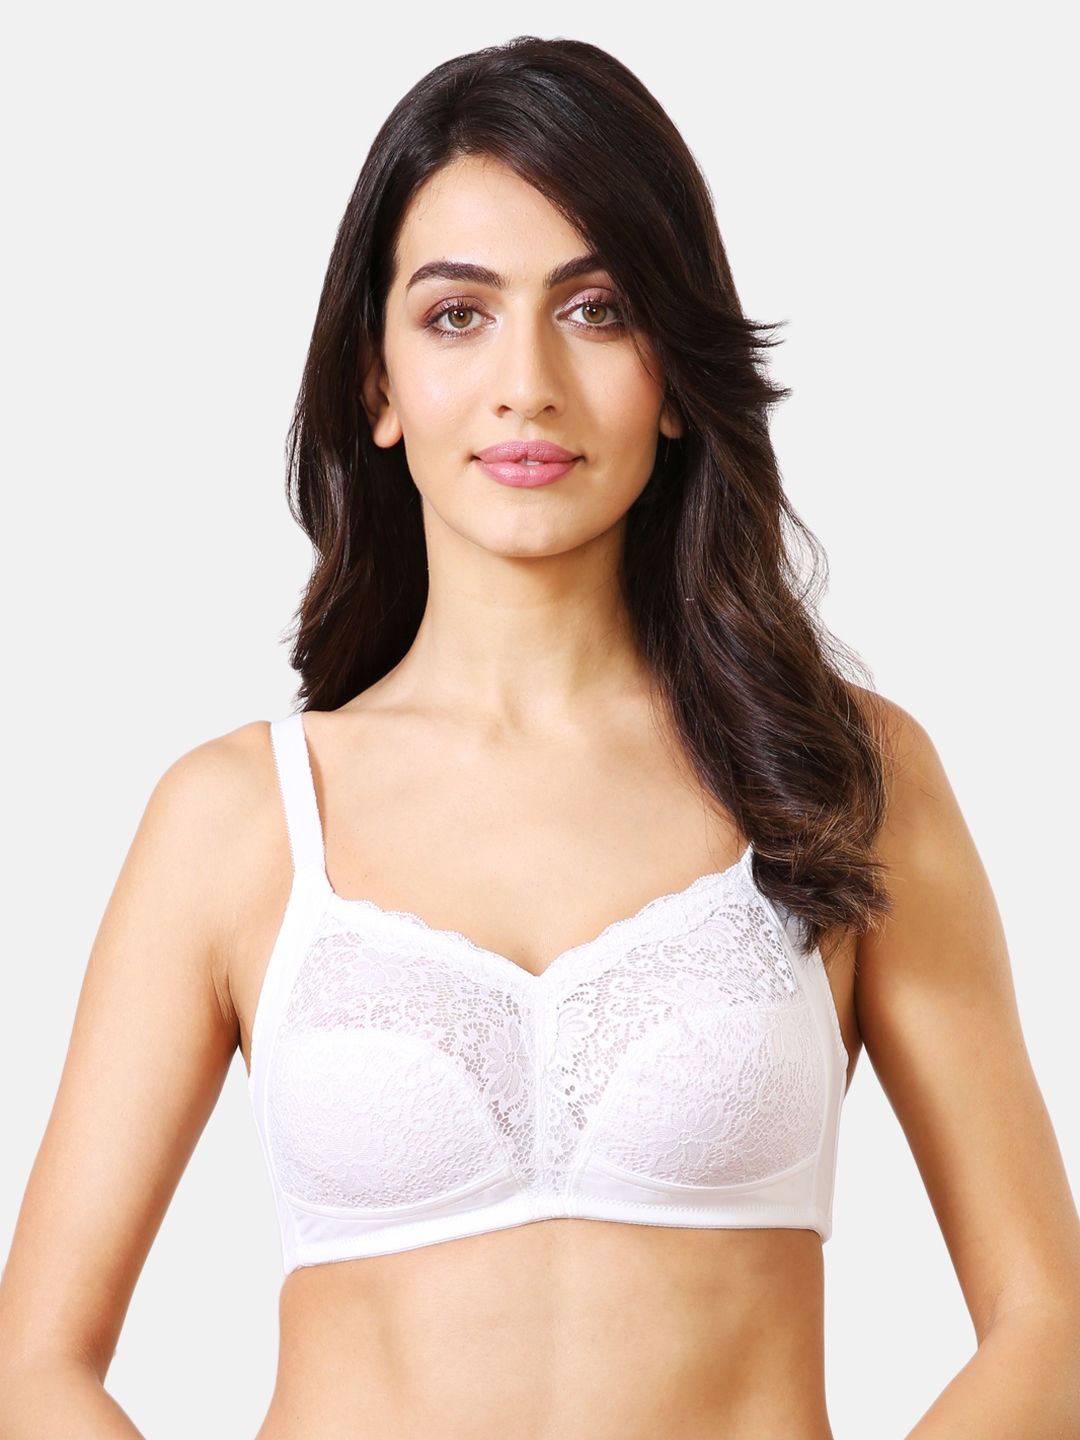 Van Heusen Intimates Bras, Non Padded Soft Cup Bra for Women at